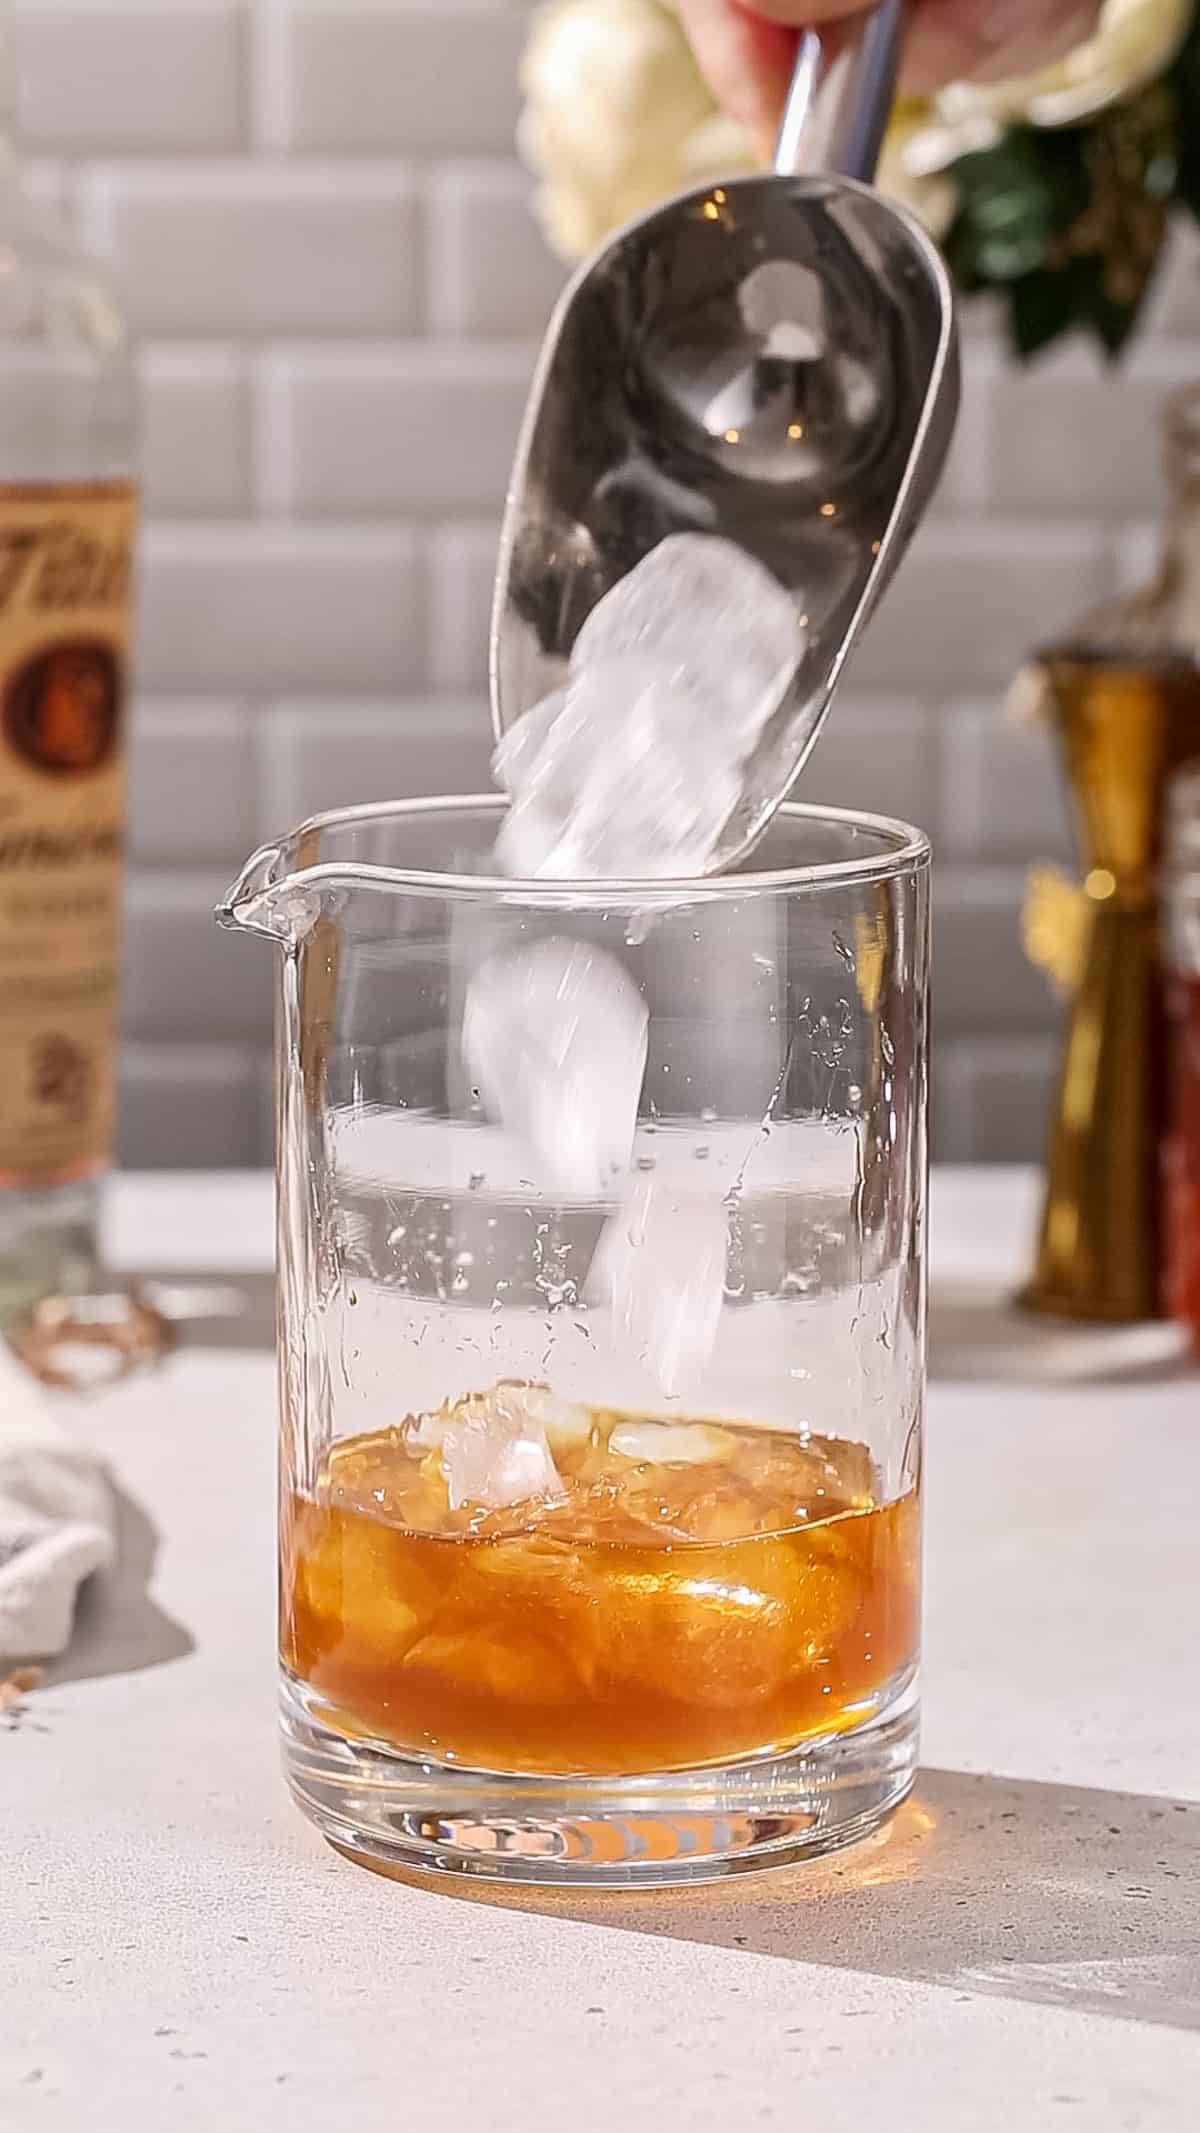 Hand using an ice scoop to add ice to a cocktail mixing glass with amber liquid in it.